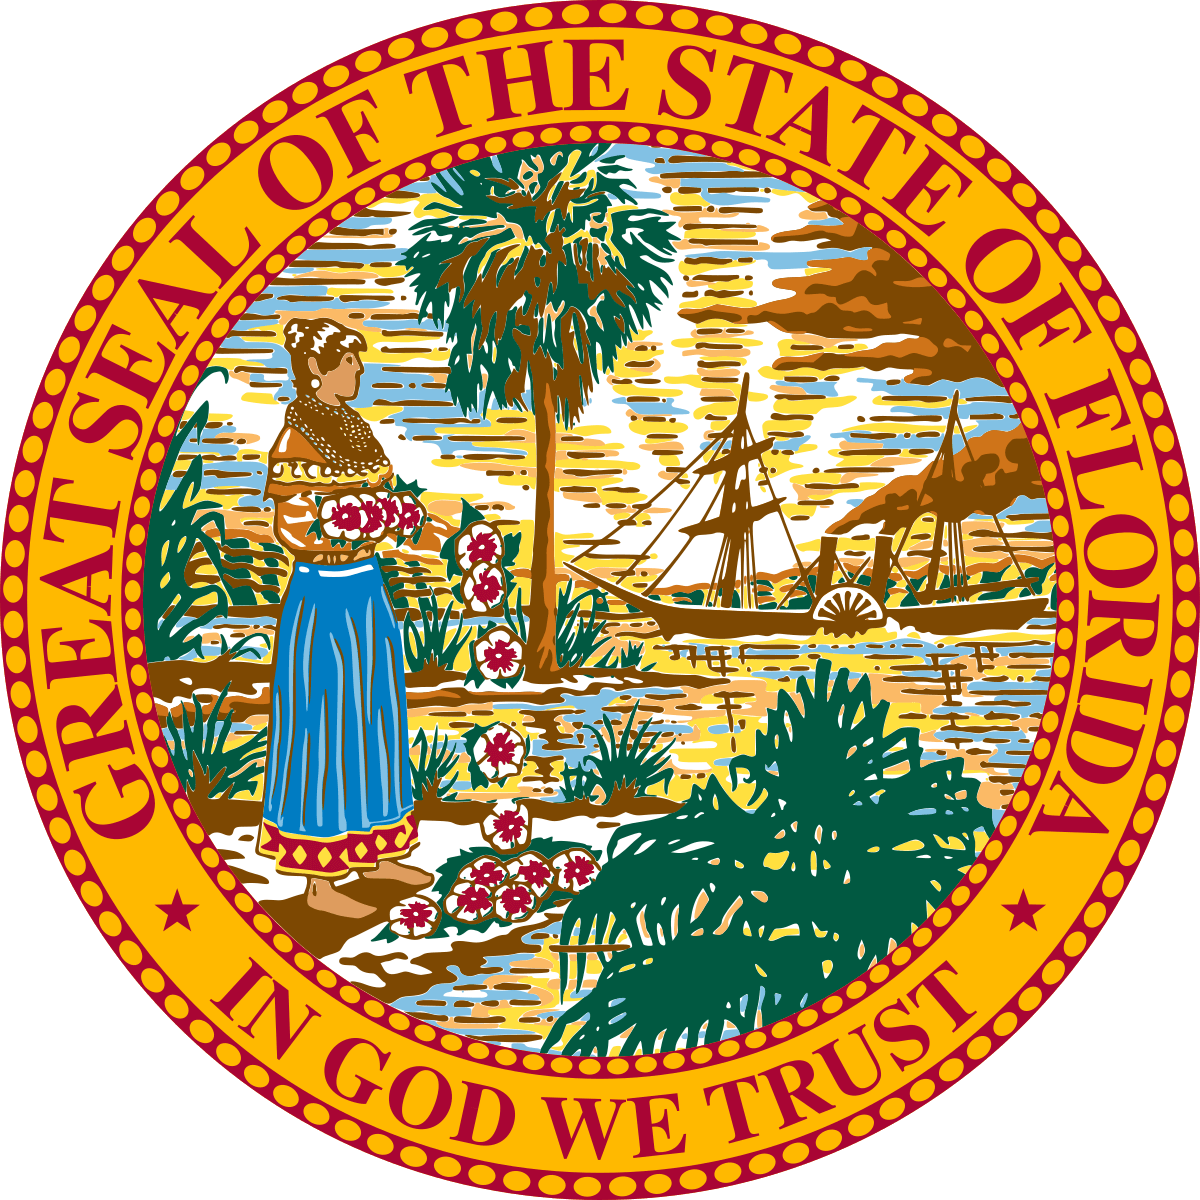  The State of Florida